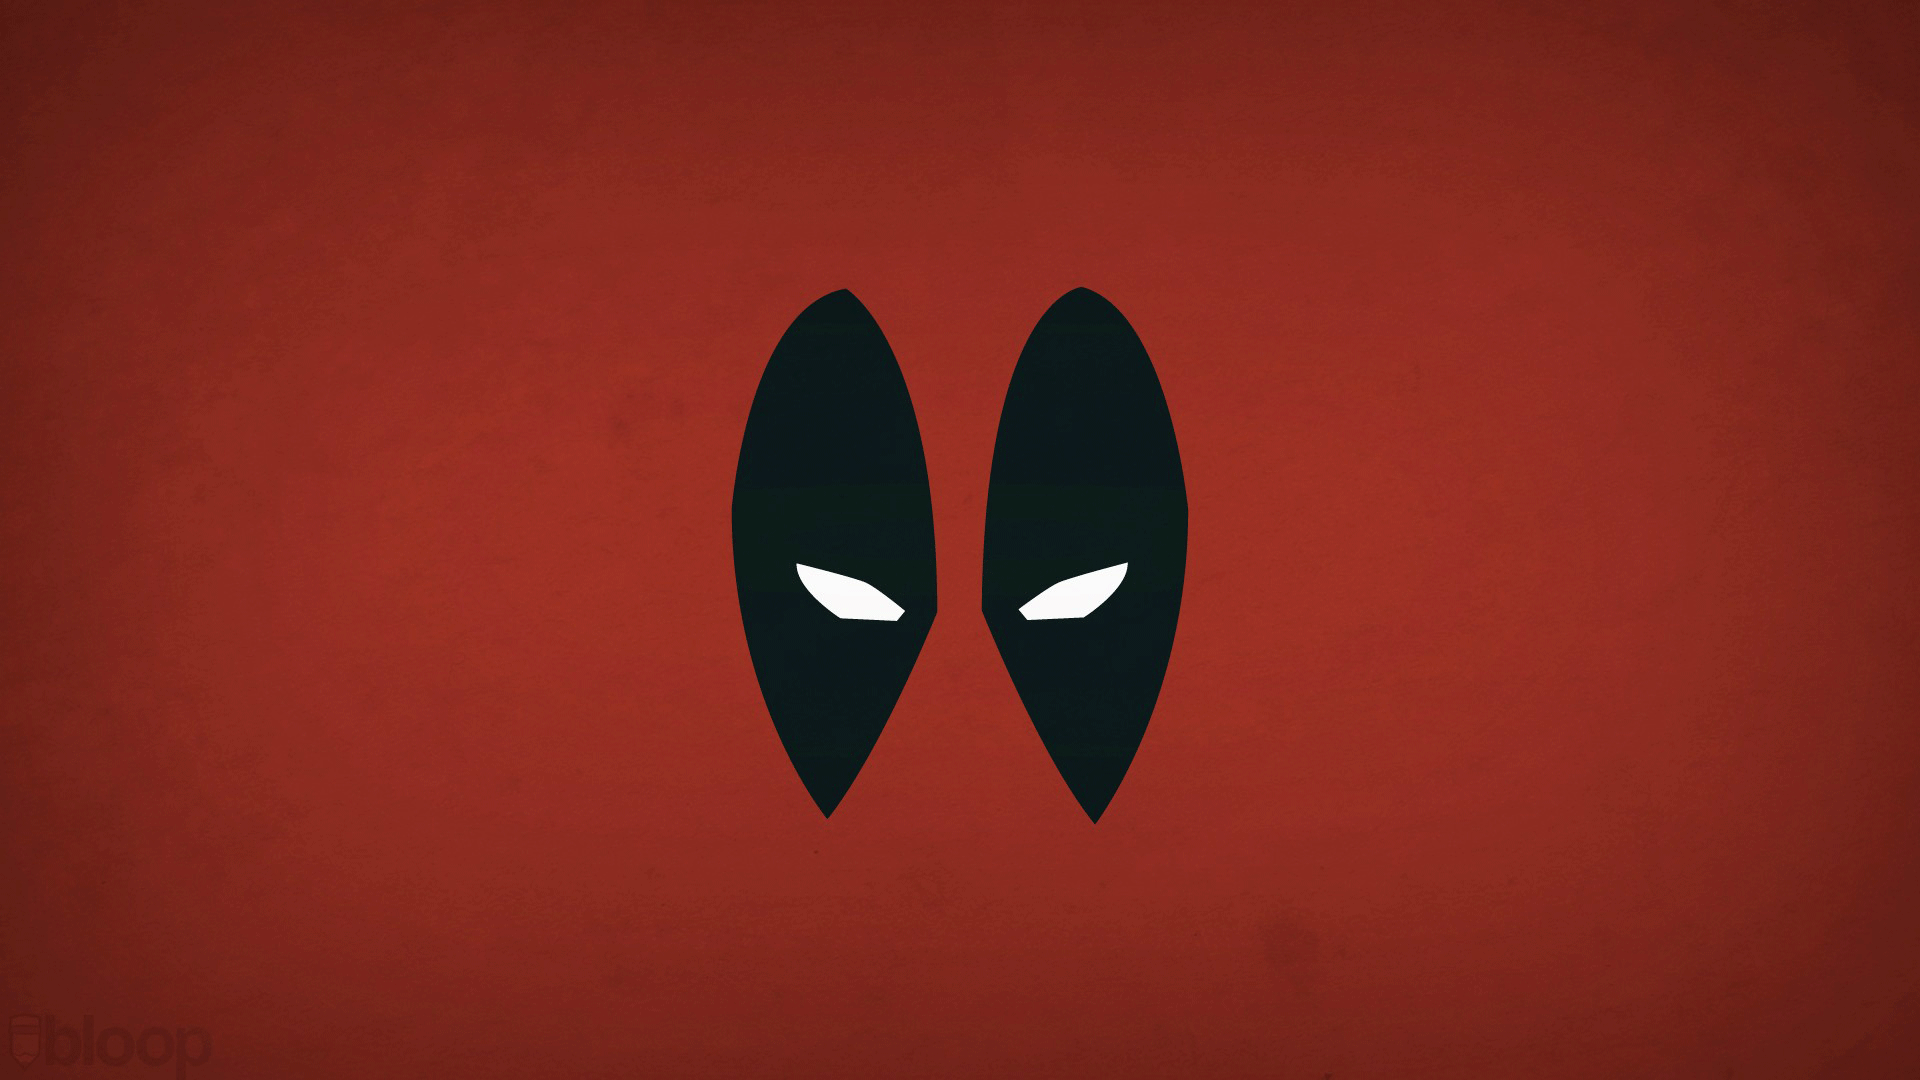 Deadpool wallpaper gif by ymeisnot on